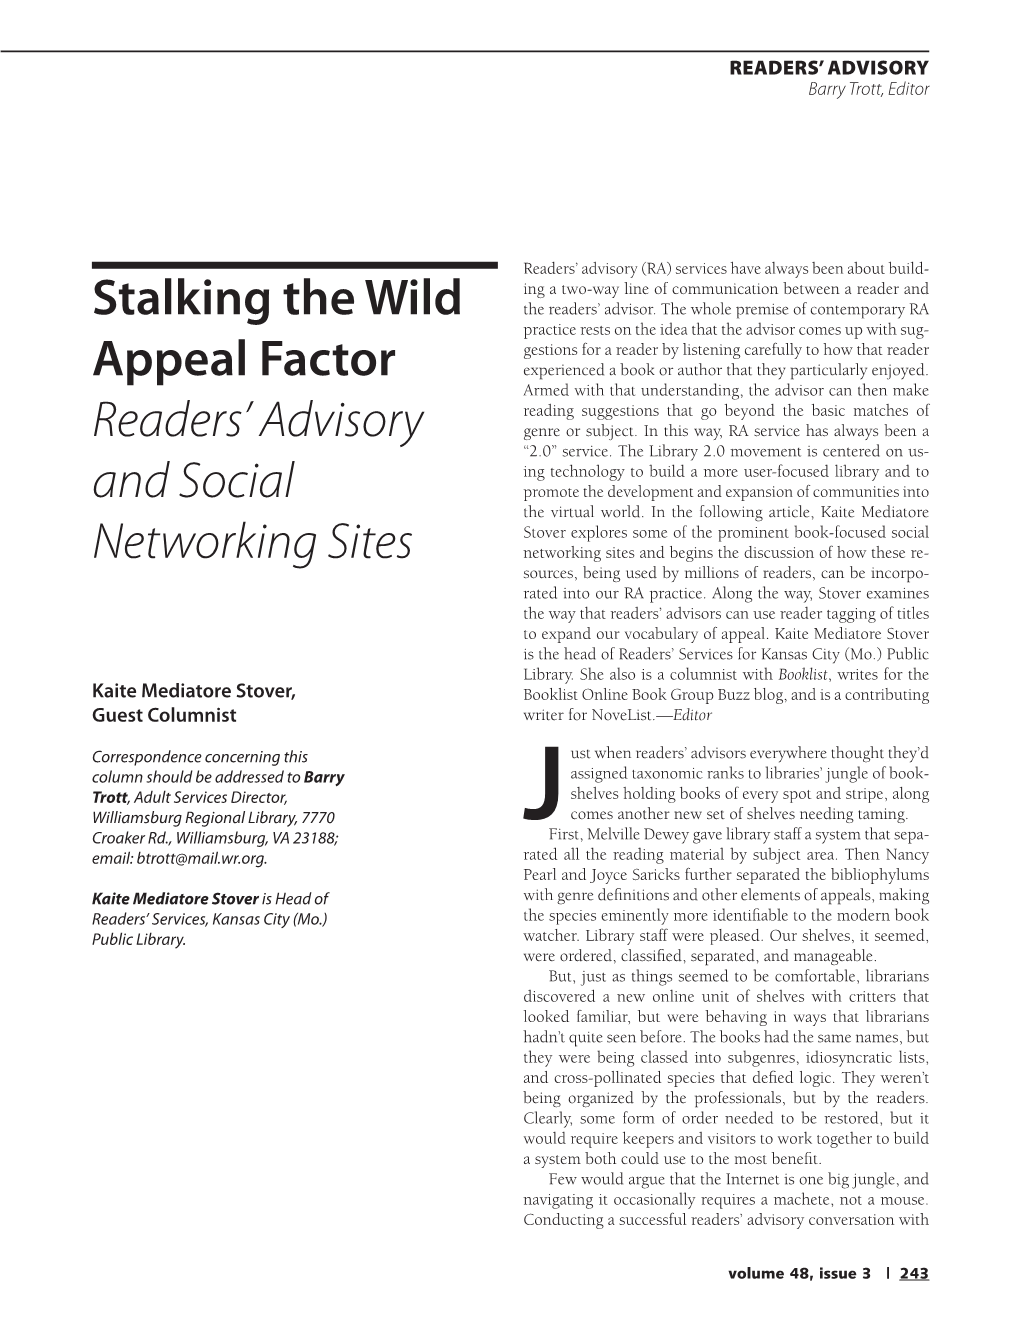 Stalking the Wild Appeal Factor Readers' Advisory and Social